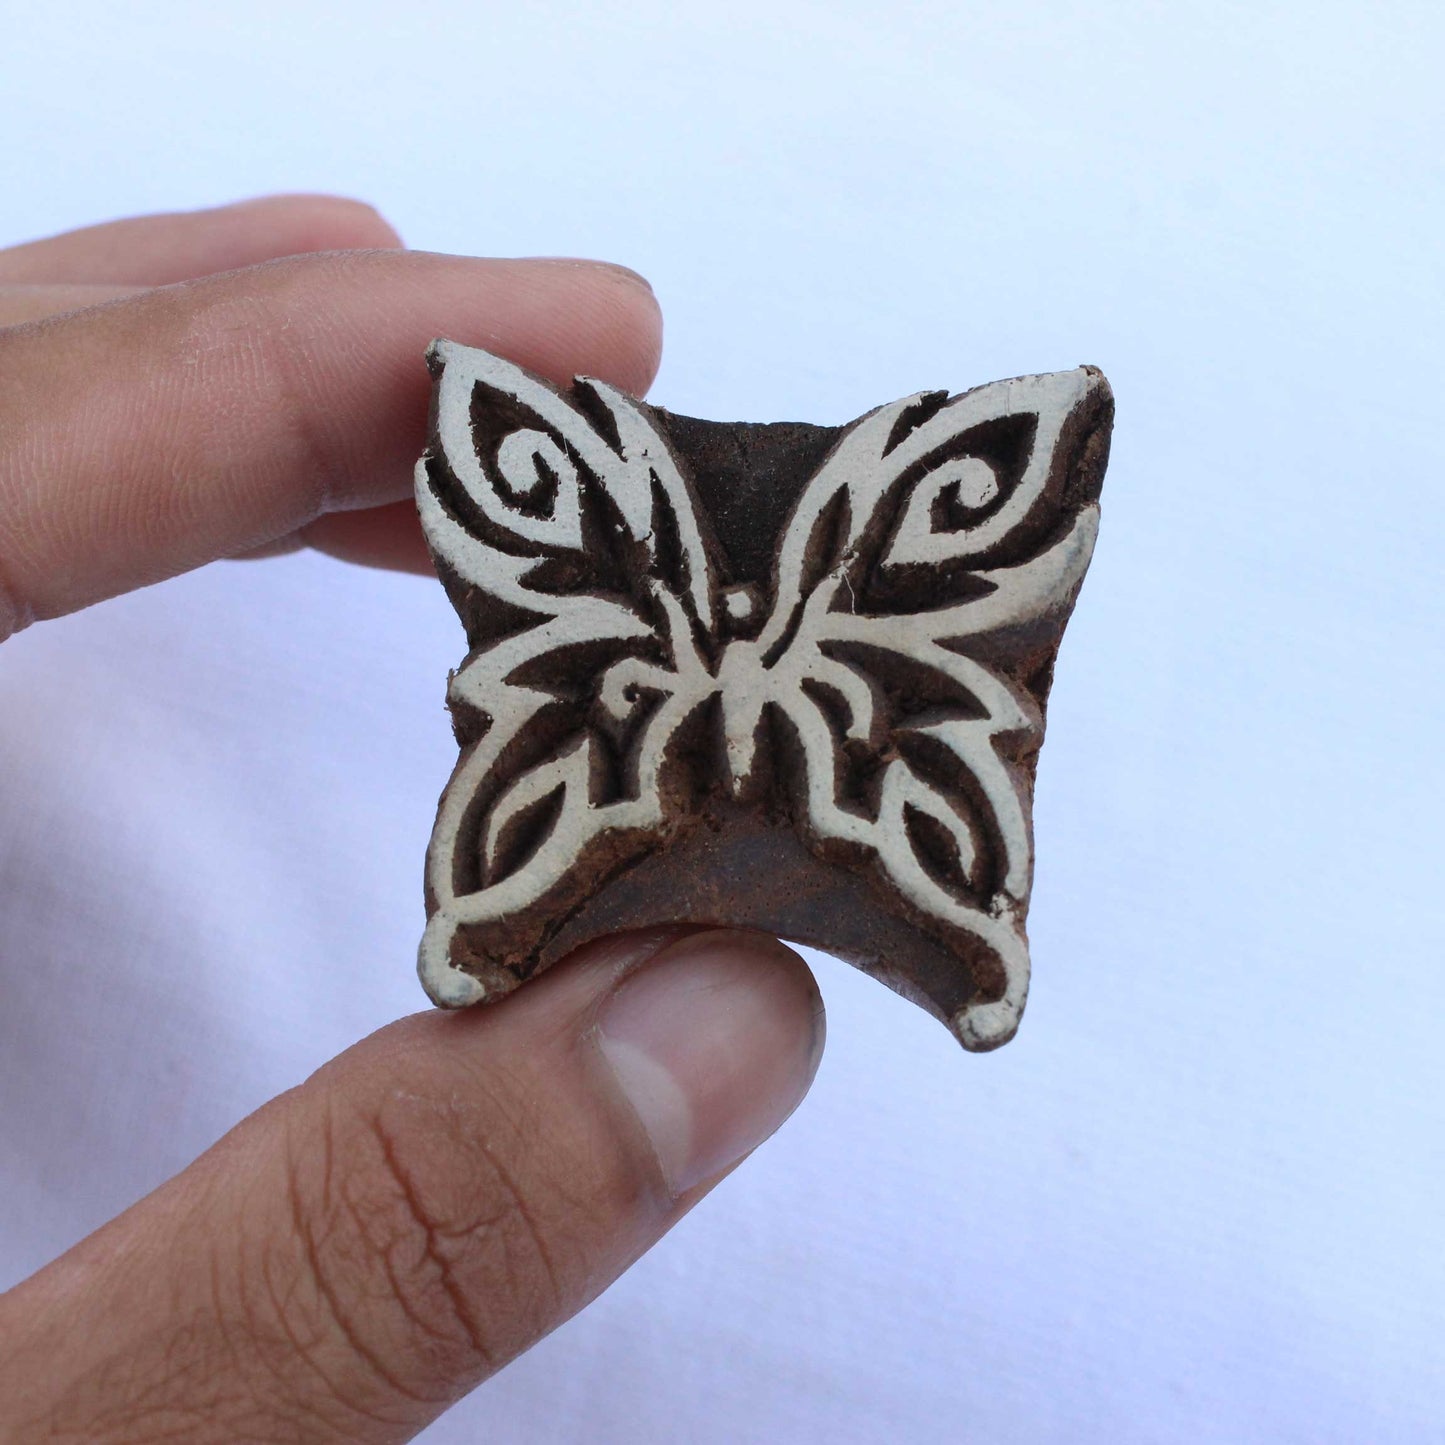 Butterfly Fabric Block Print Stamp Carve Wooden Stamp Celtic Block Print Stamp Hand Carved Wood Block Stamp For Printing Kids Soap Stamp